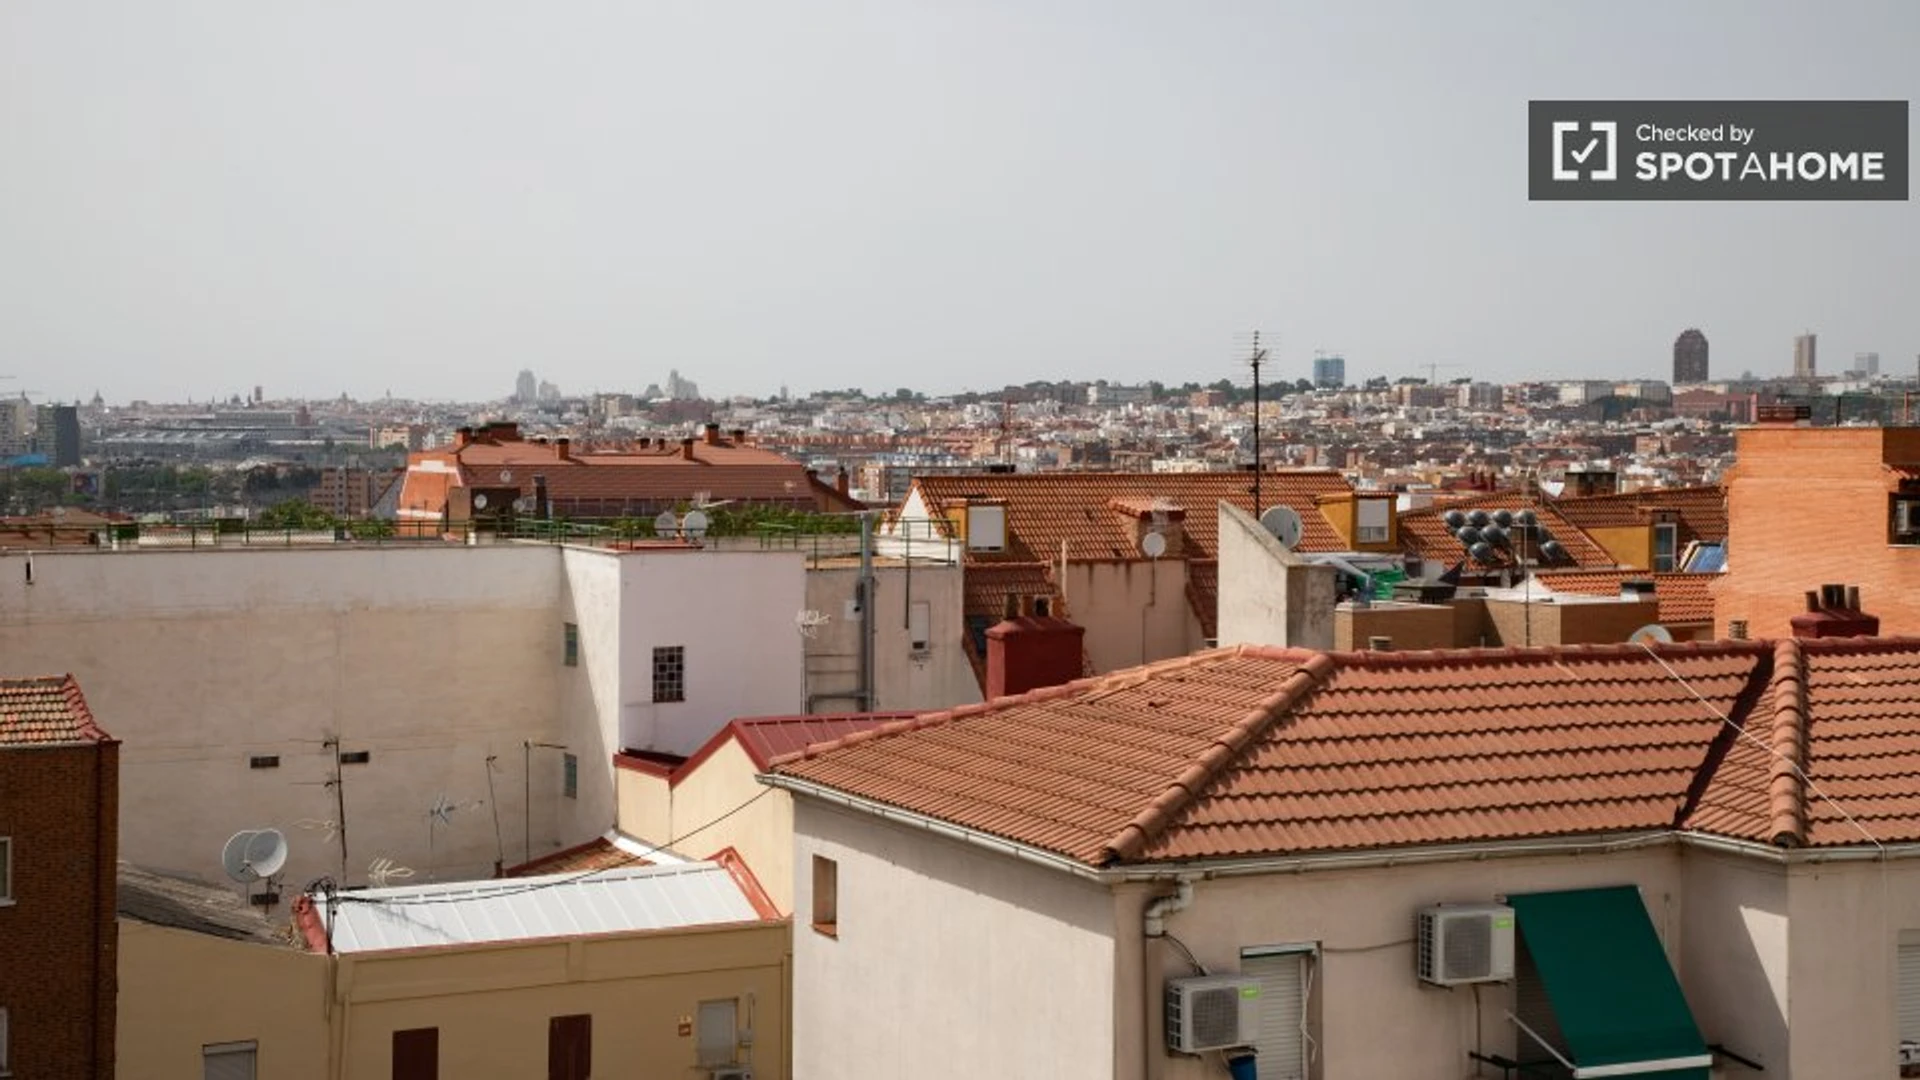 Renting rooms by the month in Alcorcón